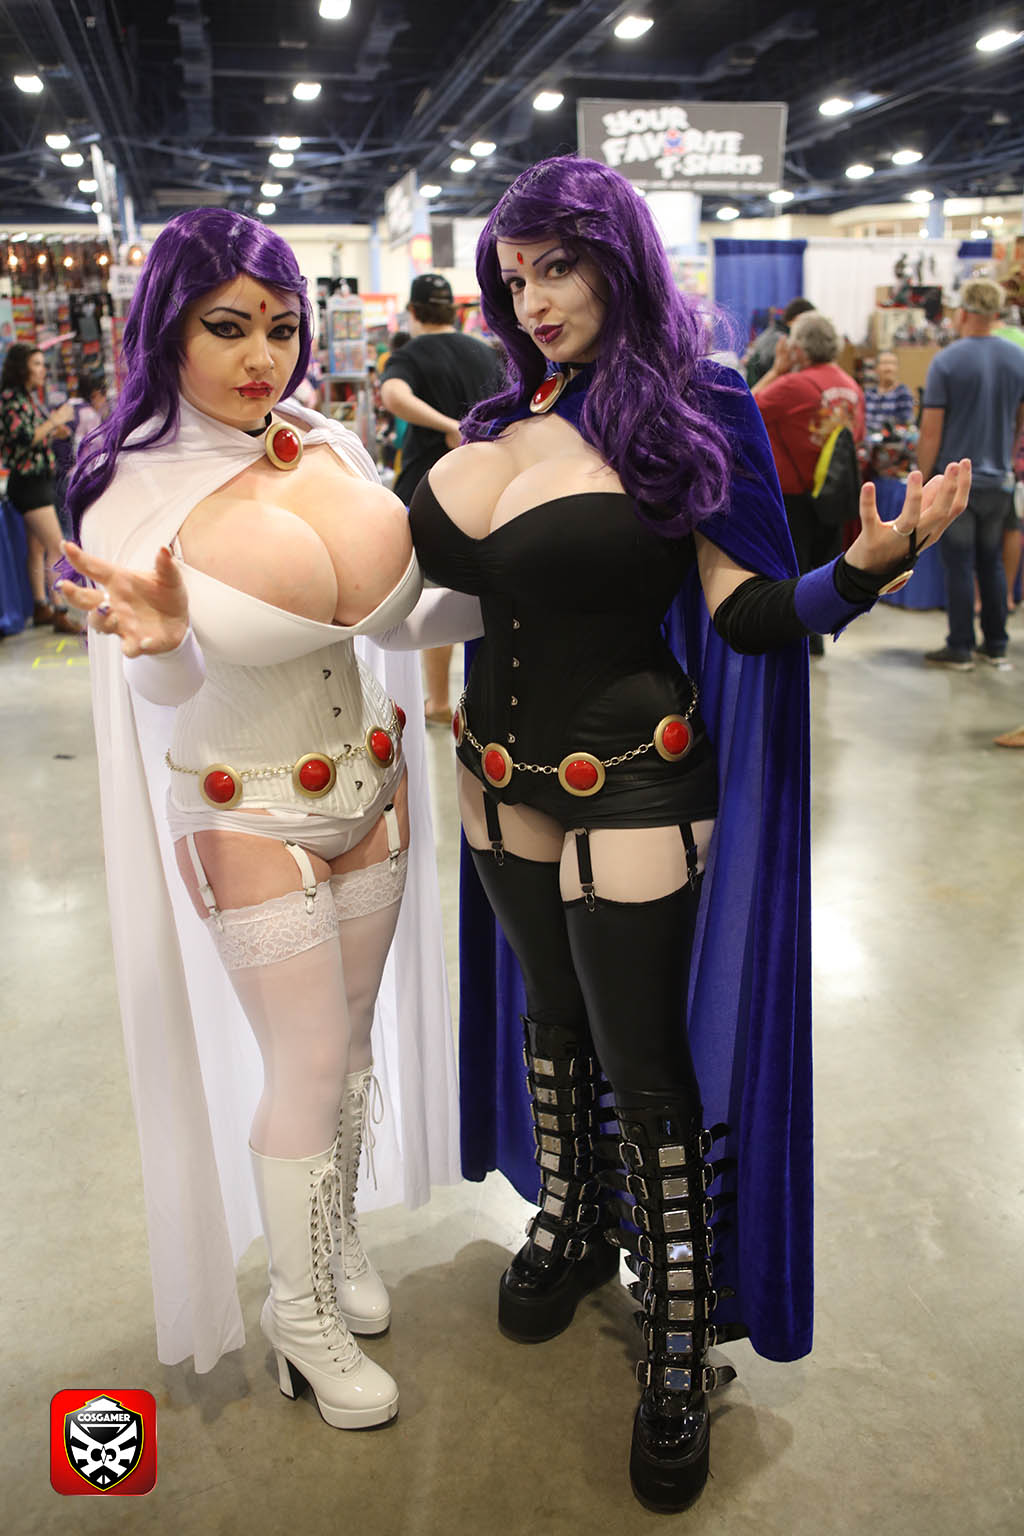 Big Tits At Cosplay Convention - Raven cosplay big tits - Other - Porn Pics